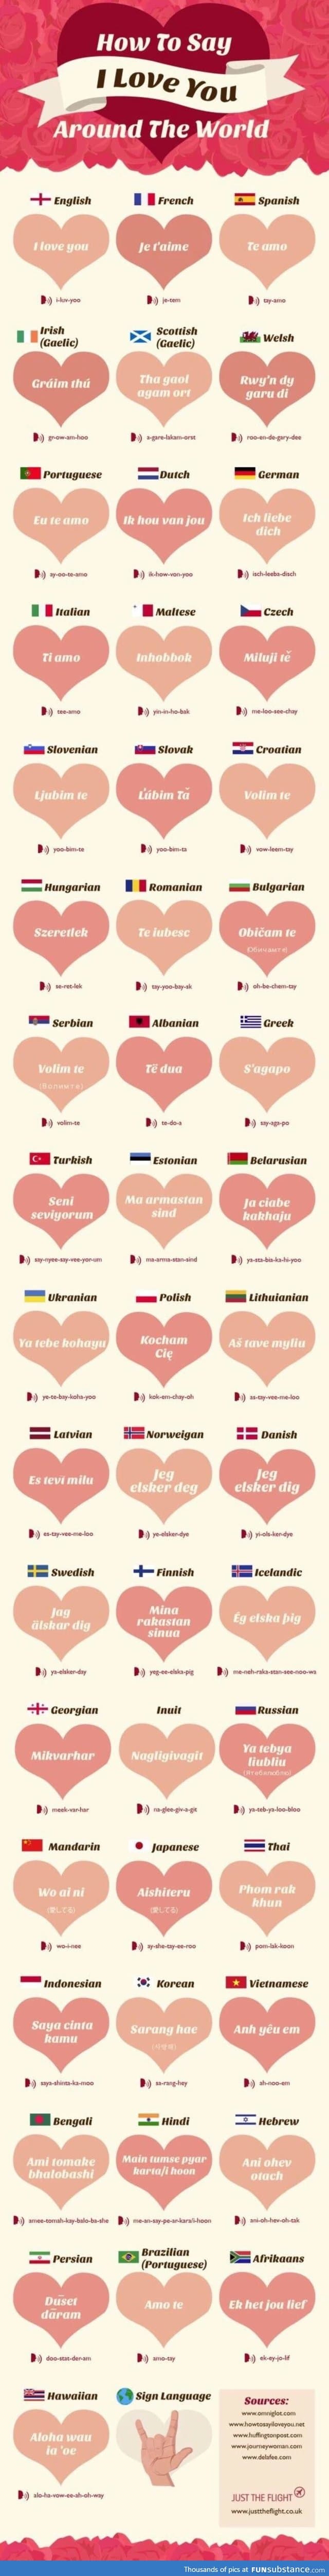 How to say I love you in different languages